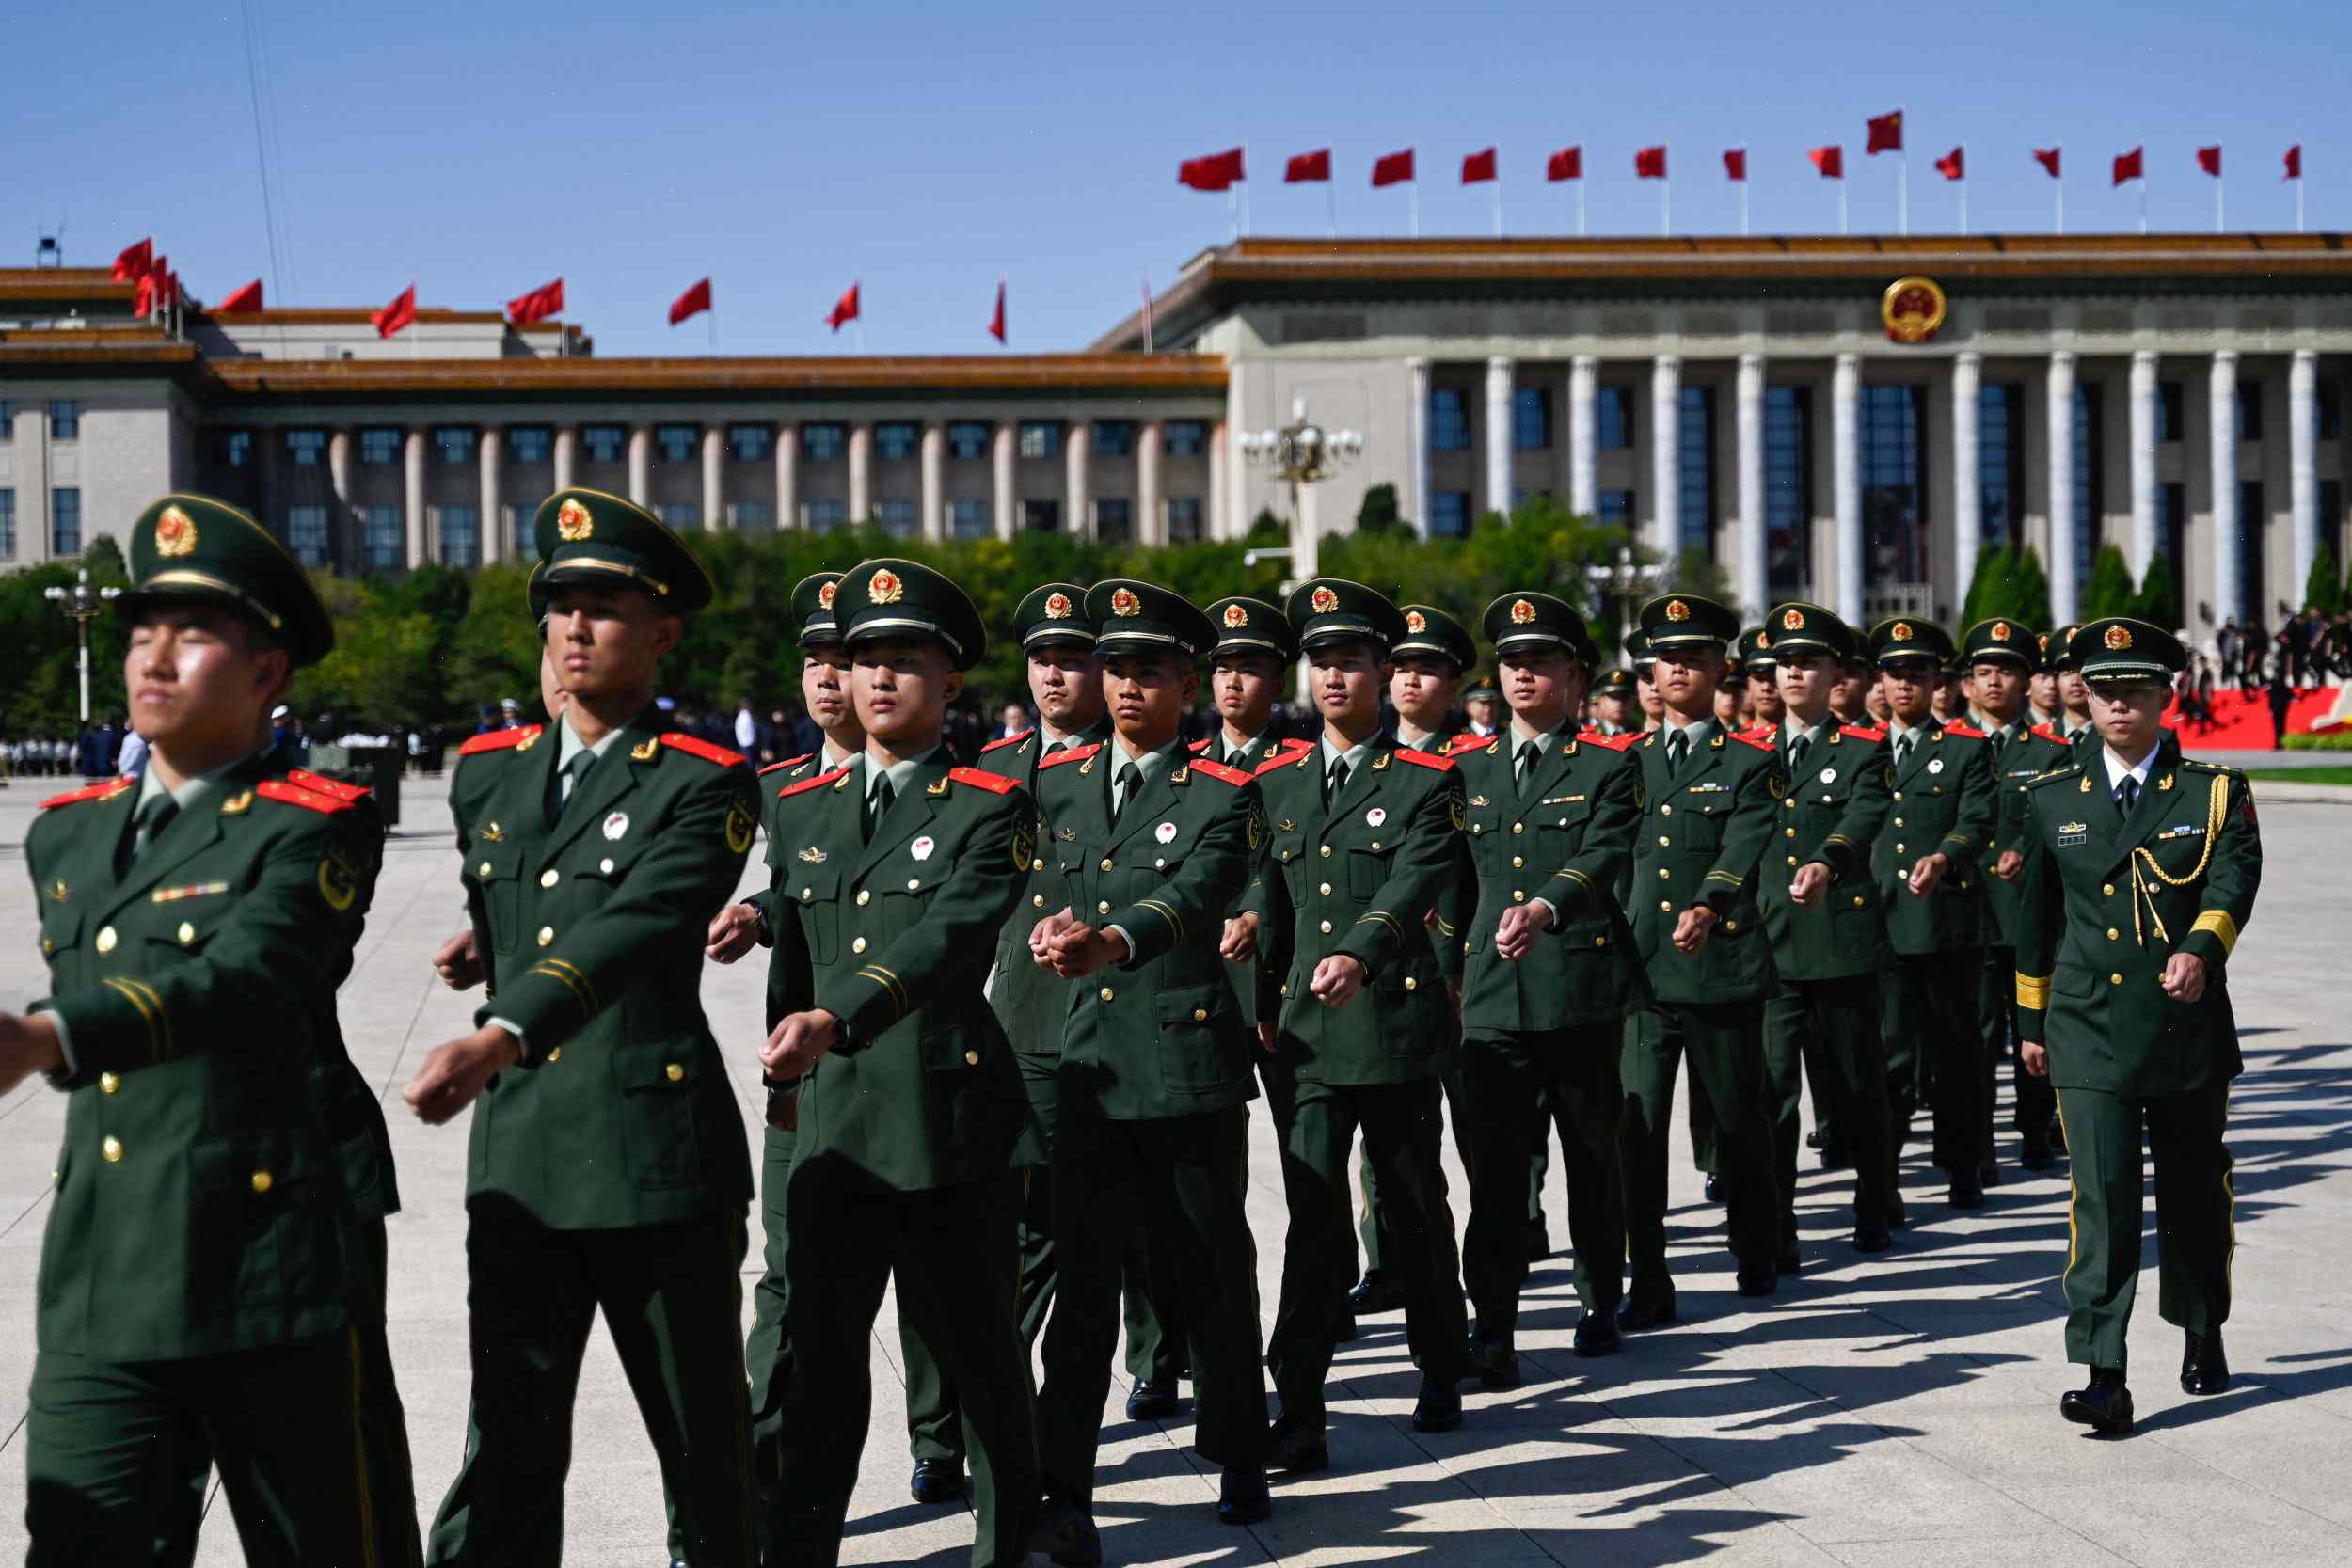 China's Chilling War Warning: A Call for Caution?